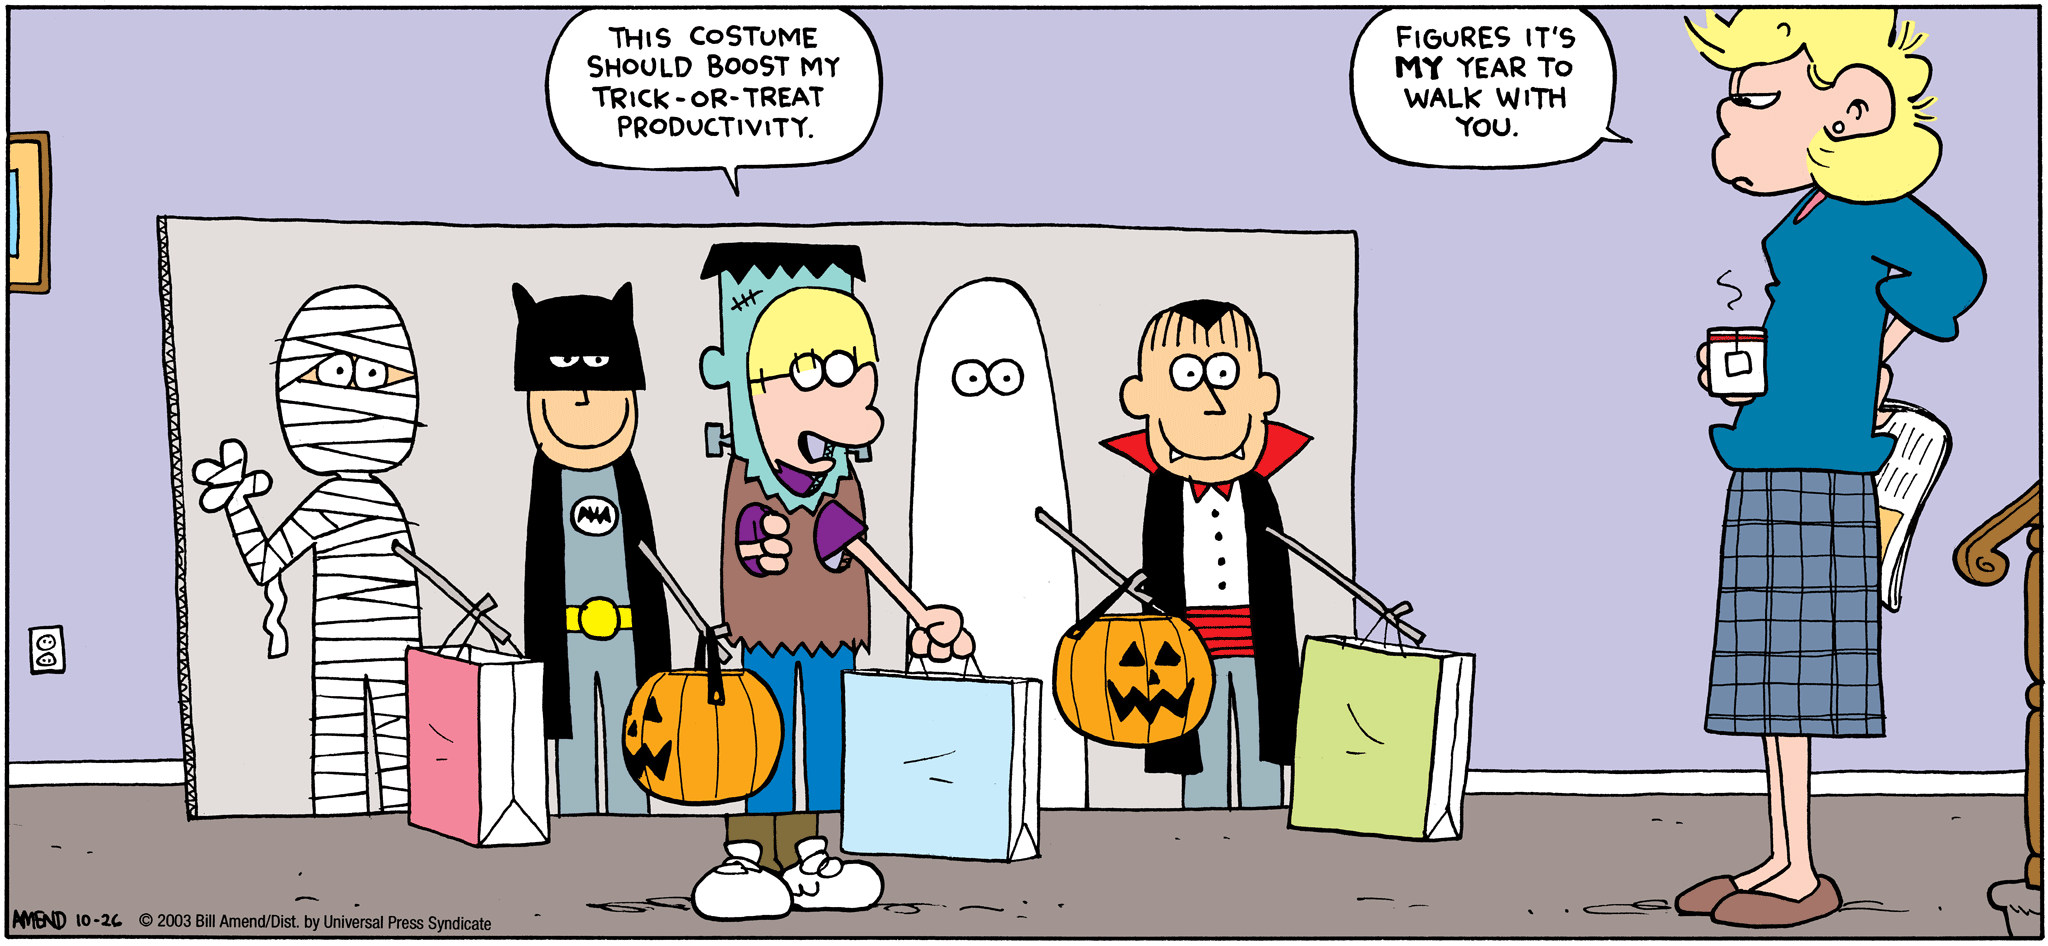 Halloween Comics - FoxTrot comic strip by Bill Amend - Published October 26, 2003 - Jason Fox: This costume should boos my trick-or-treat productivity. Andy Fox: Figures it's my year to walk with you.